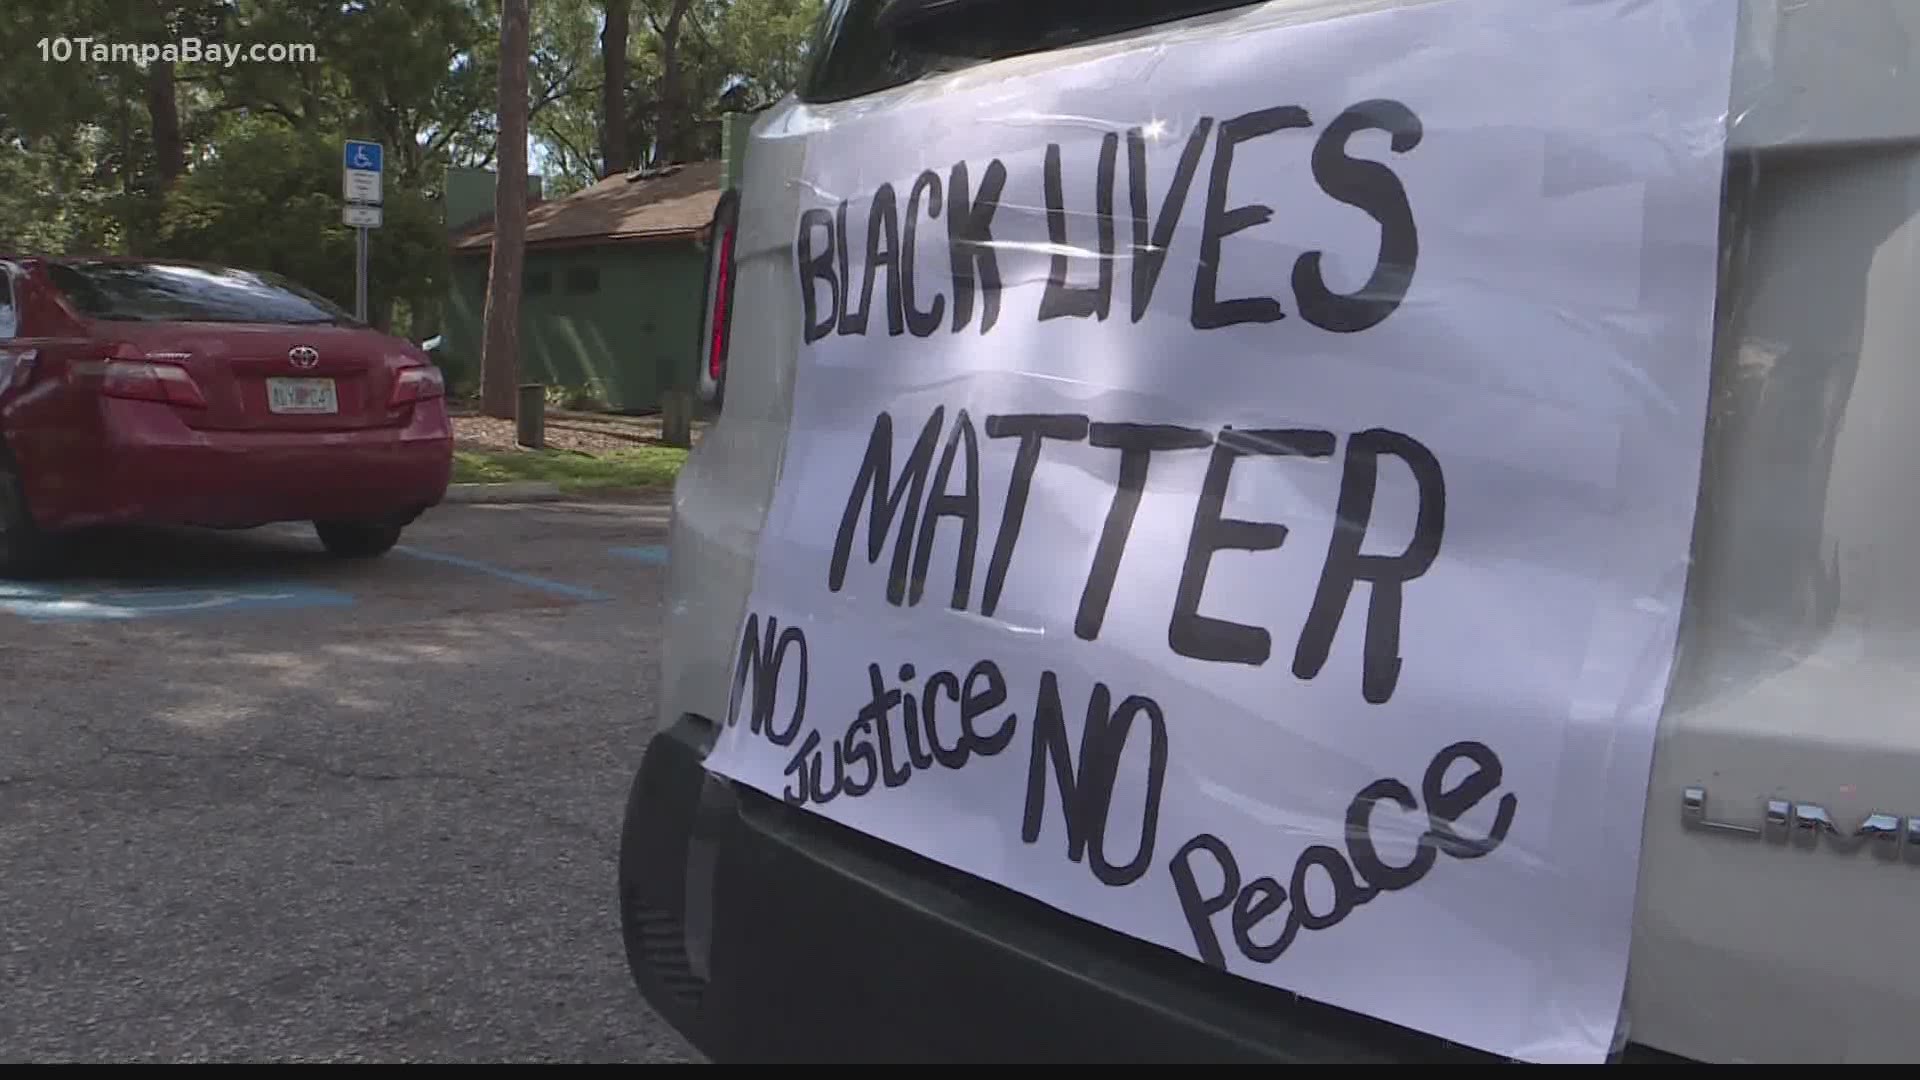 Socially distanced demonstrators stood in solidarity with Jacob Blake and his family. The 29-year-old is still recovering after being shot by police in Wisconsin.